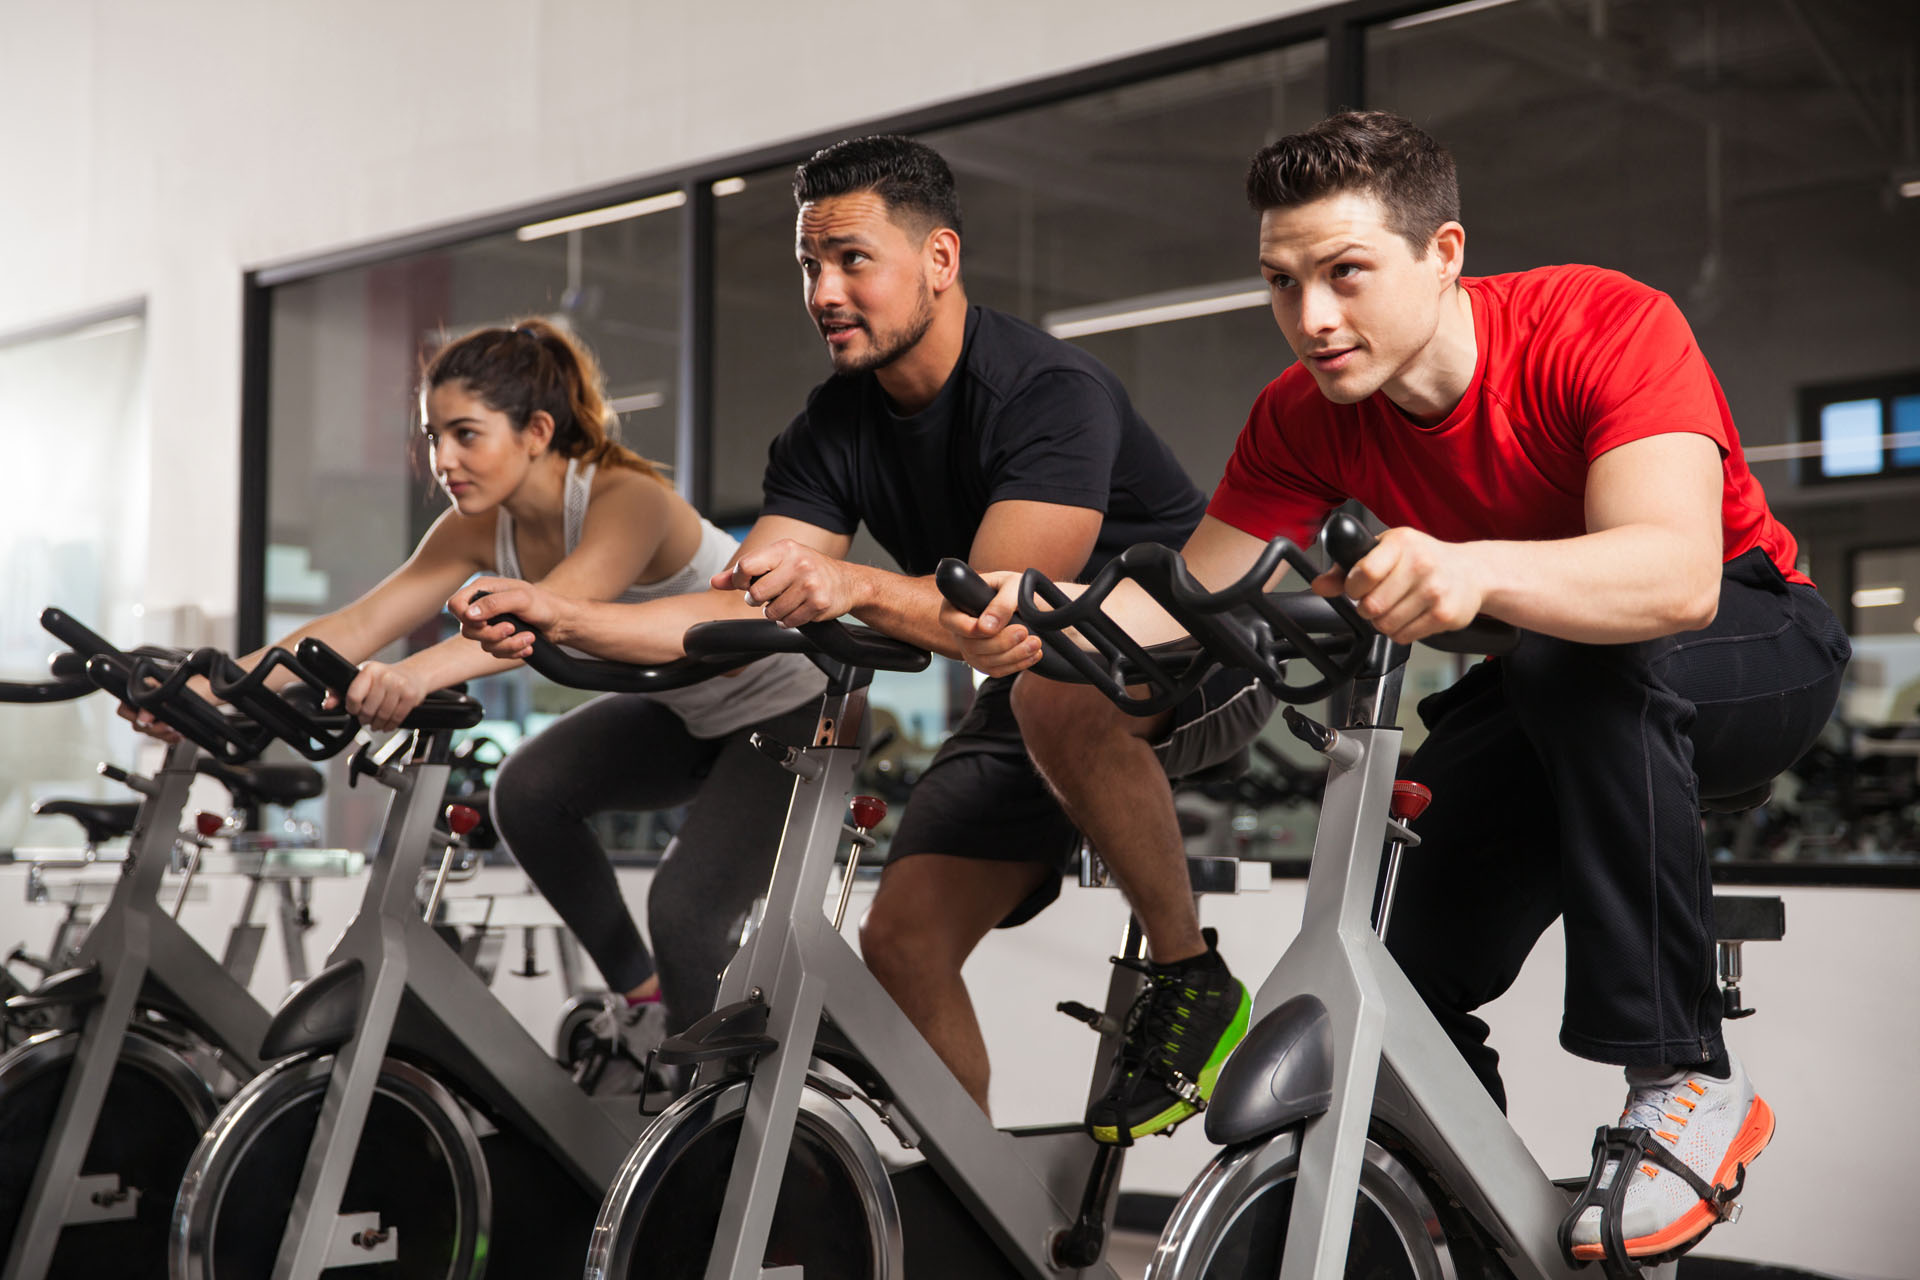 Three young people doing some cardio and acting all focused during their spinning class